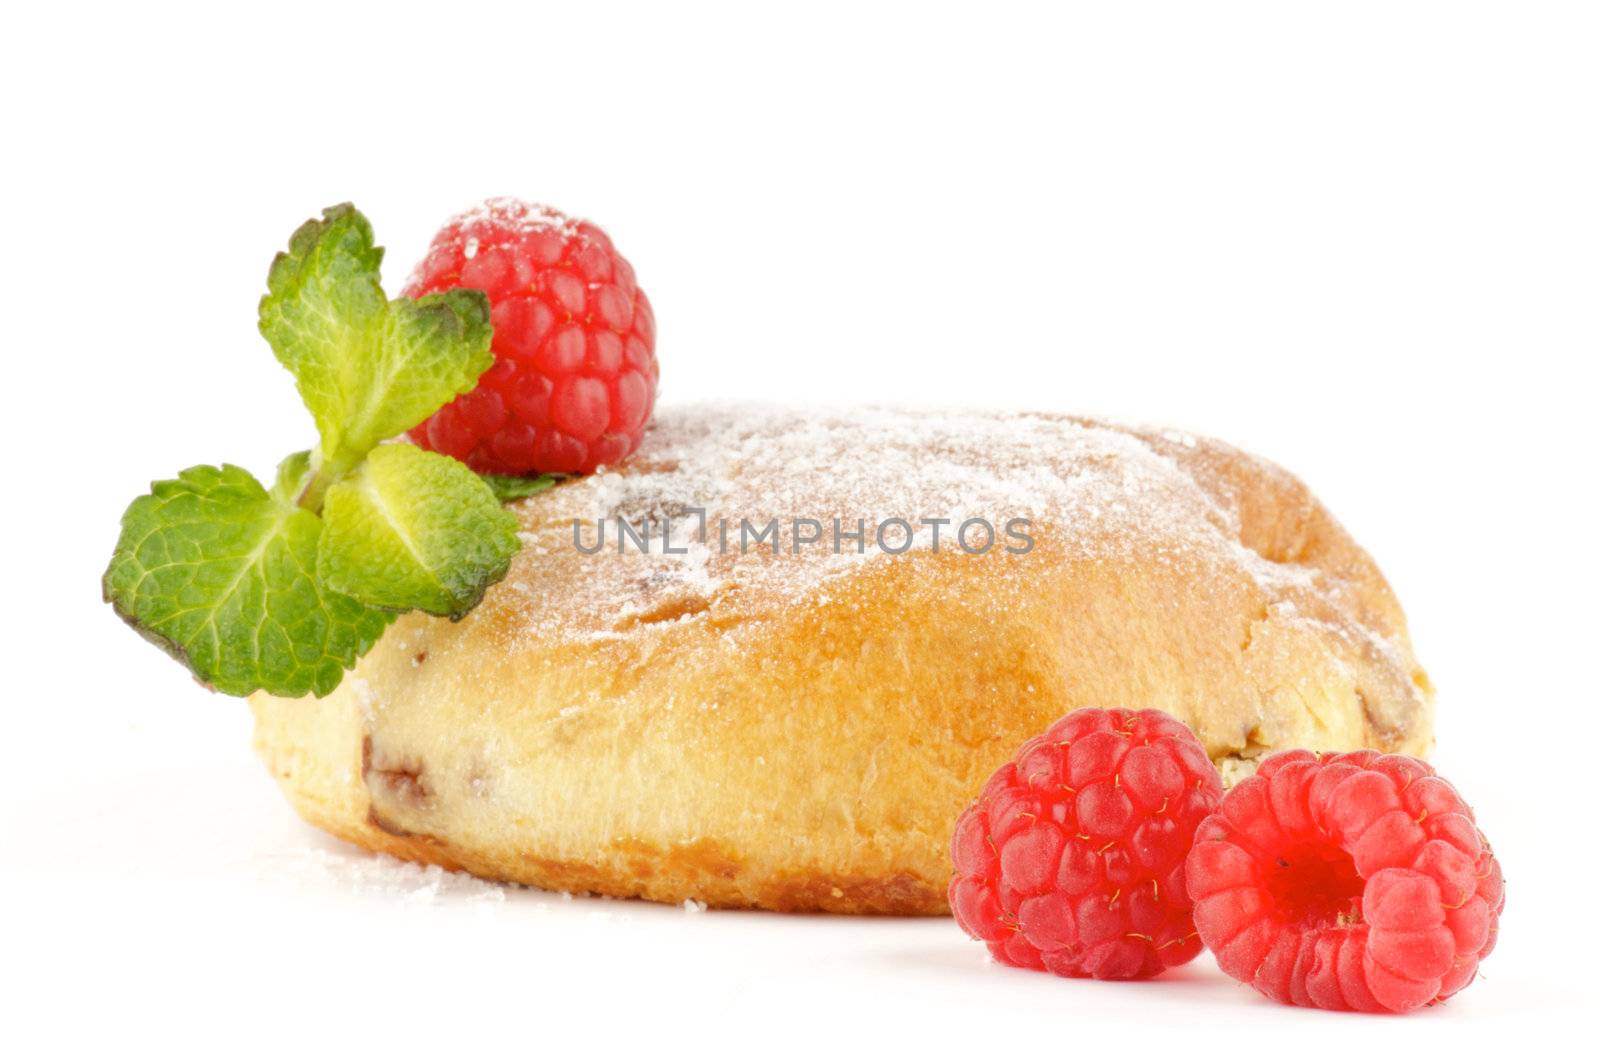 Appetizing baked cakes with raisin, raspberry and mint decorated sugar powder isolated on white background